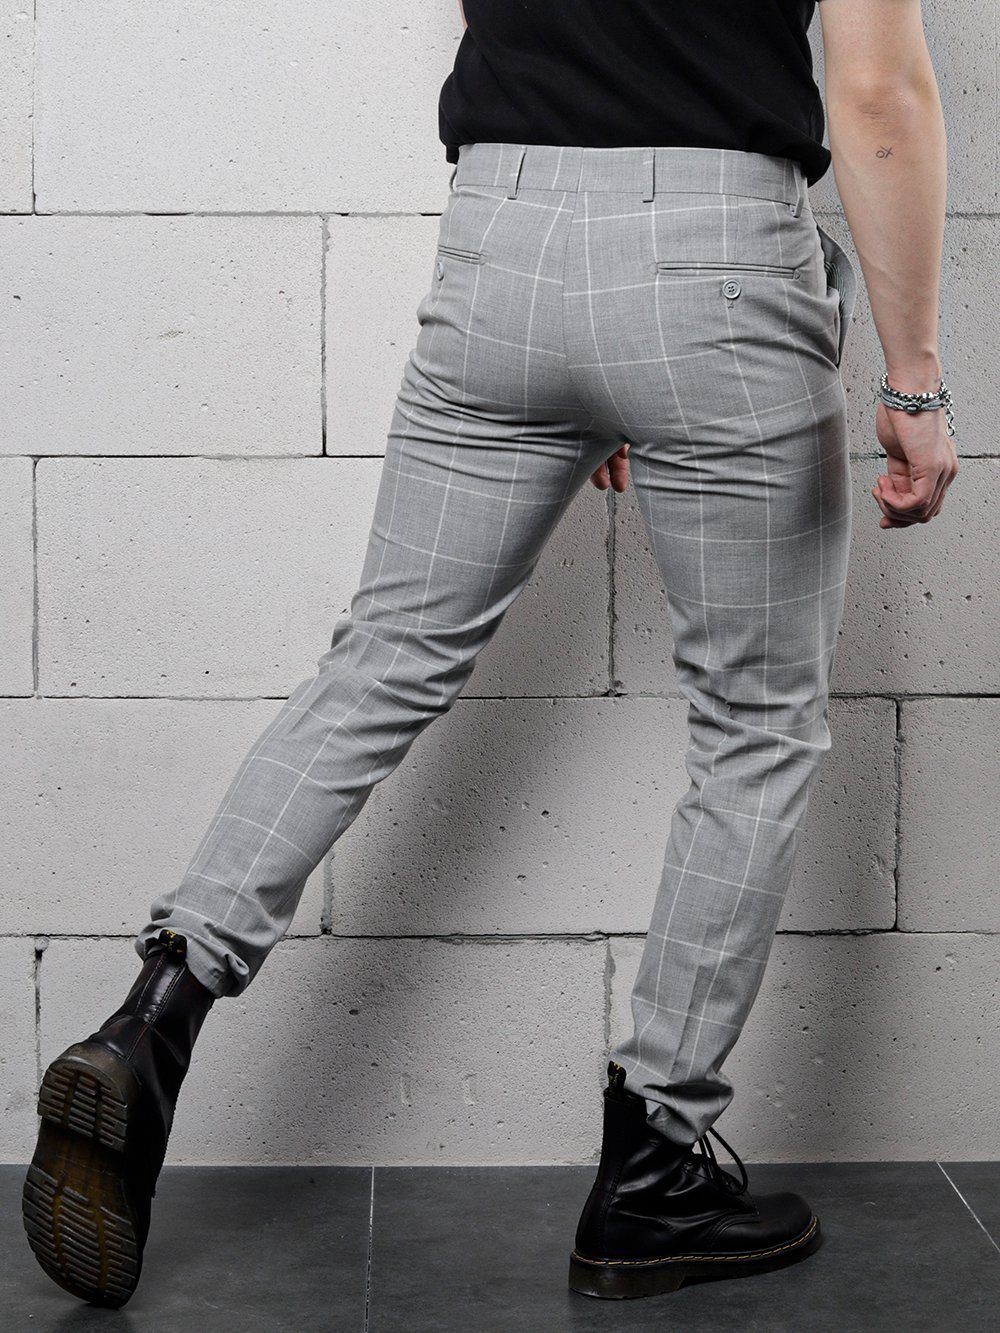 A man wearing ICED AMERICANO PANTS is standing with his back to a wall.